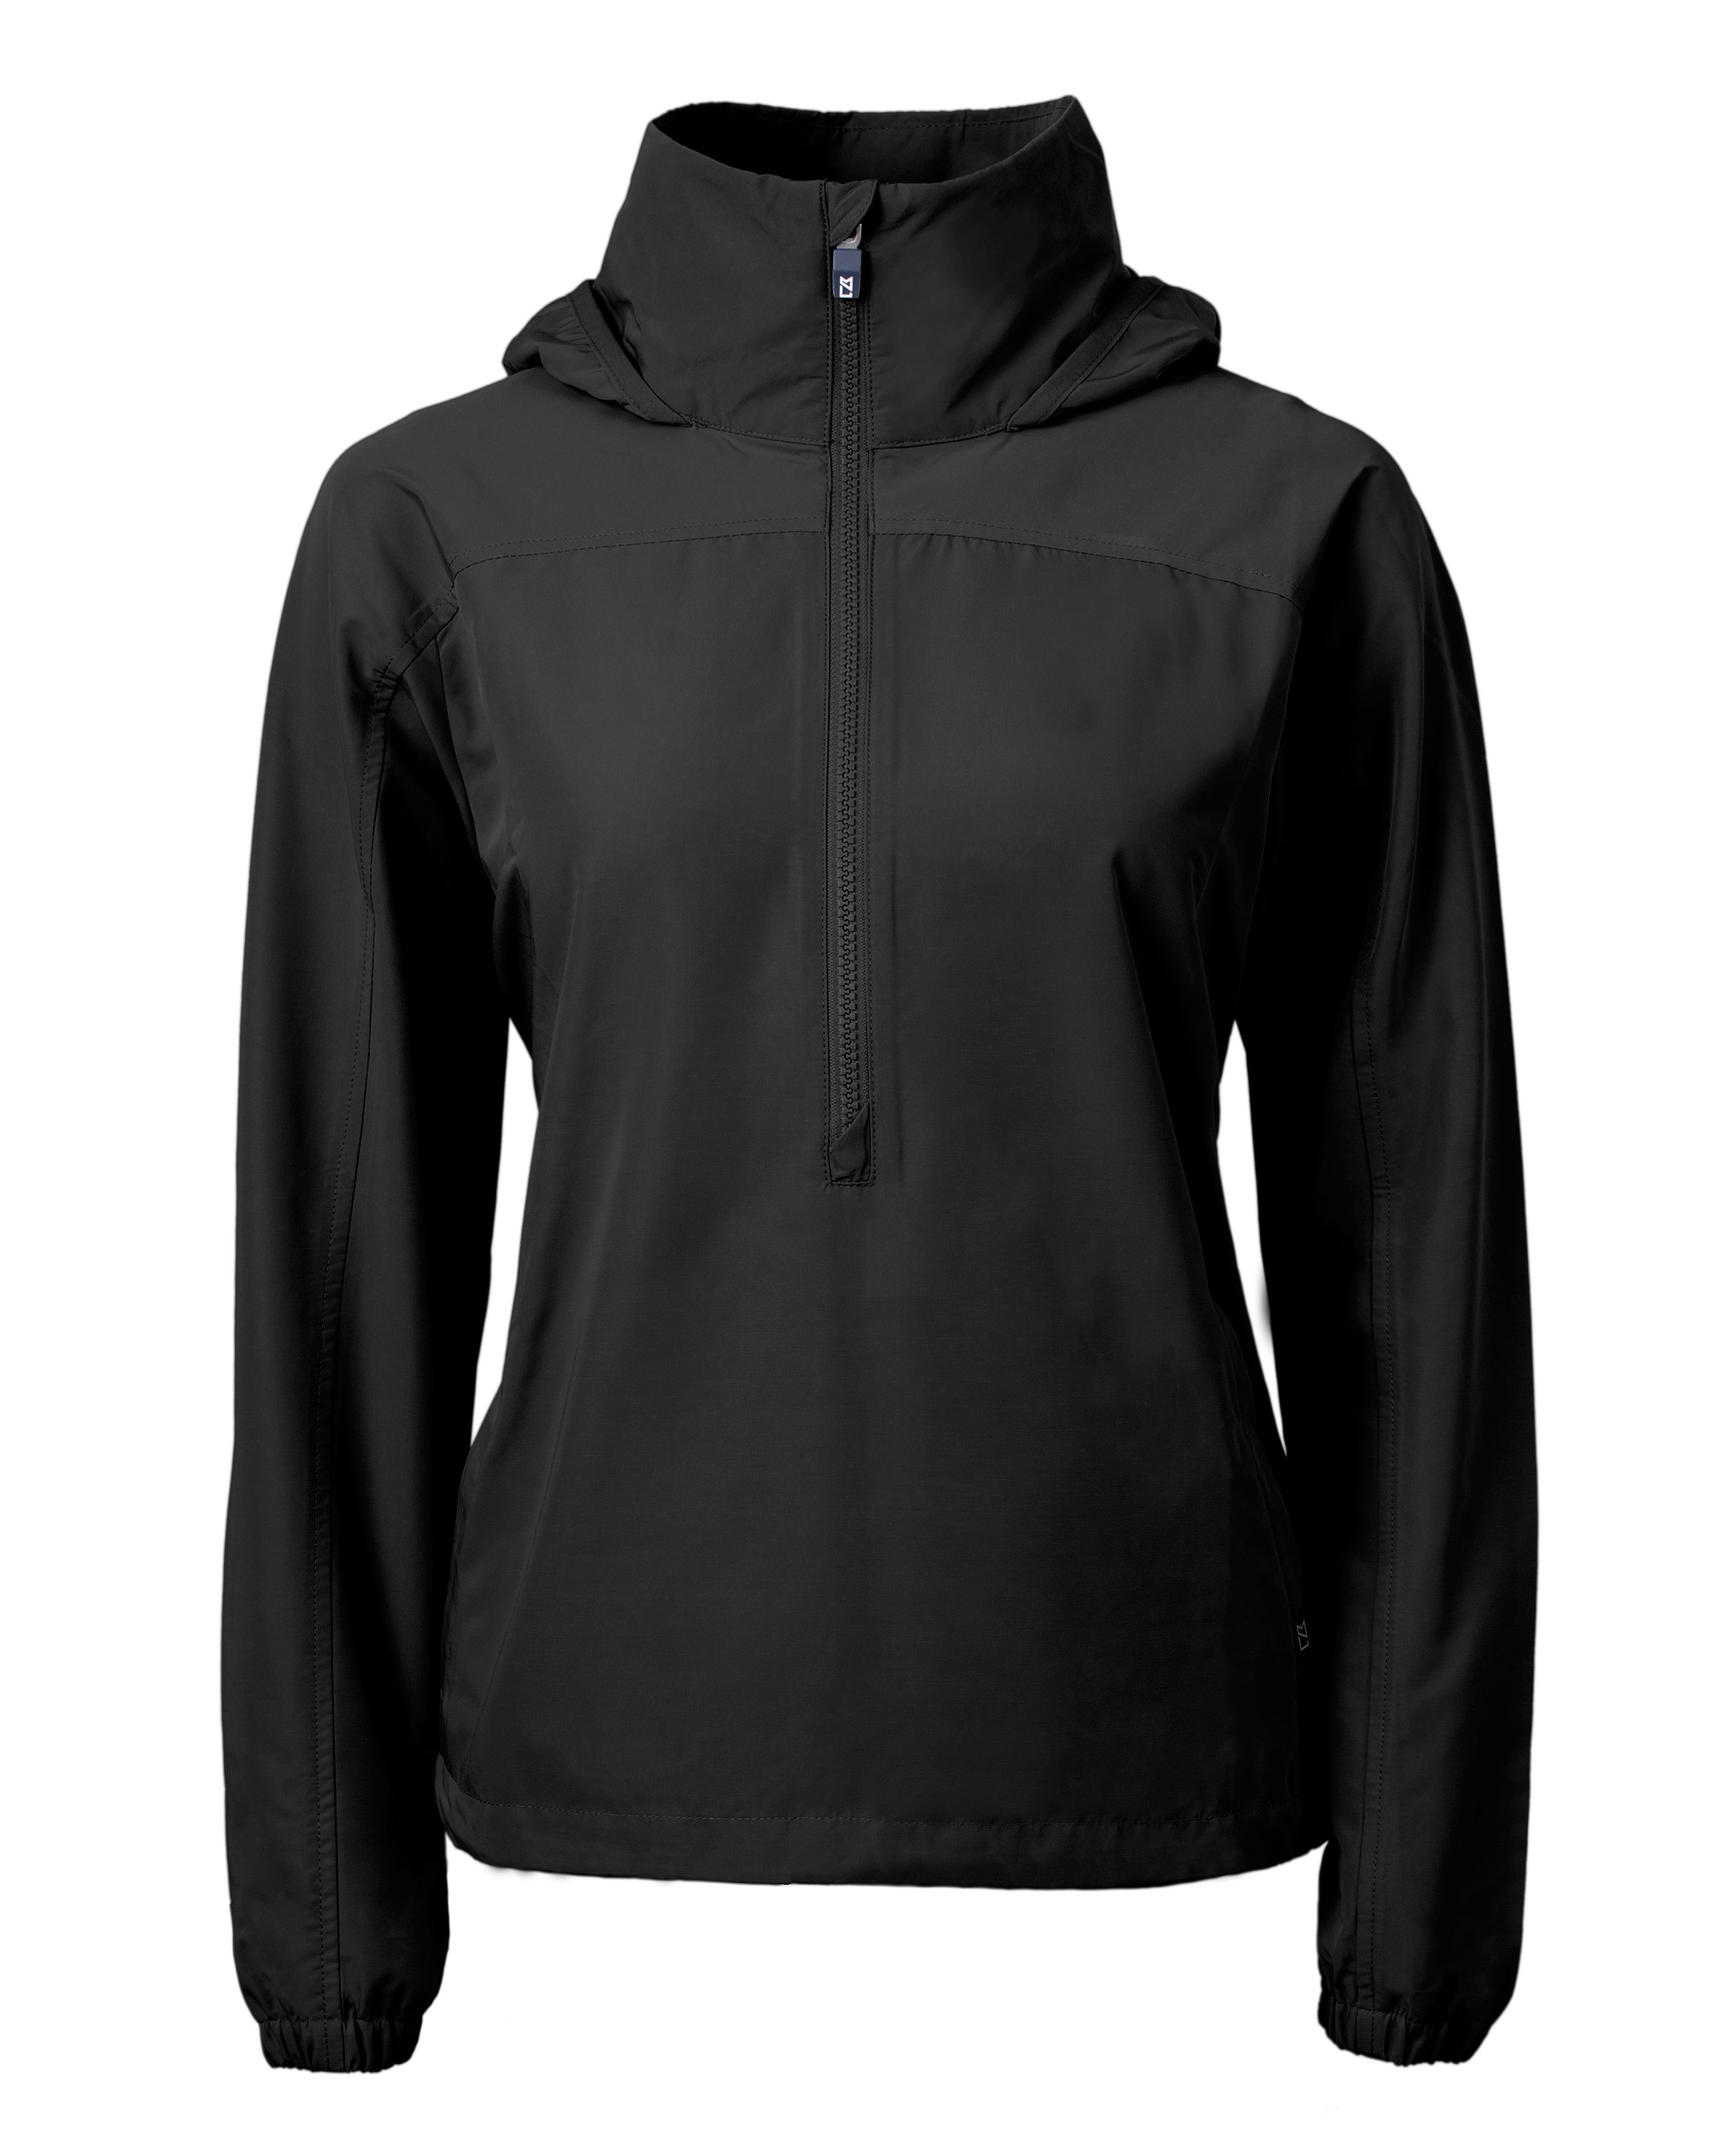 CUTTER & BUCK LCO00062 - Women's Charter Eco Recycled Anorak Jacket